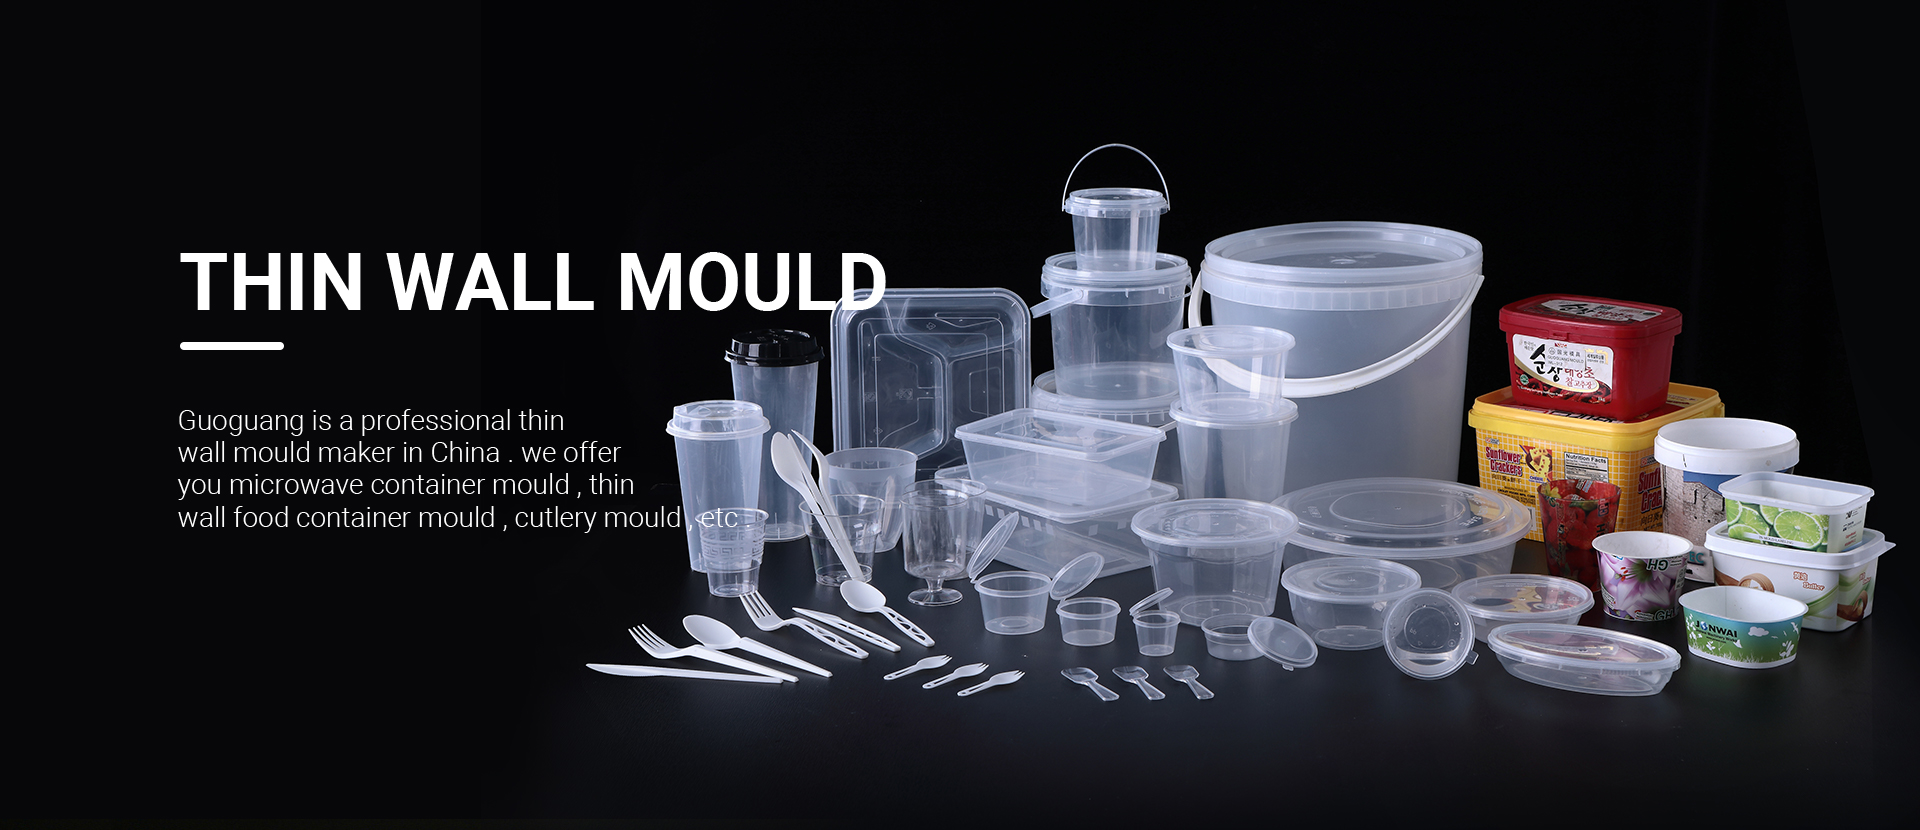 thin wall mould, paint bucket mould,thin-walled container mould